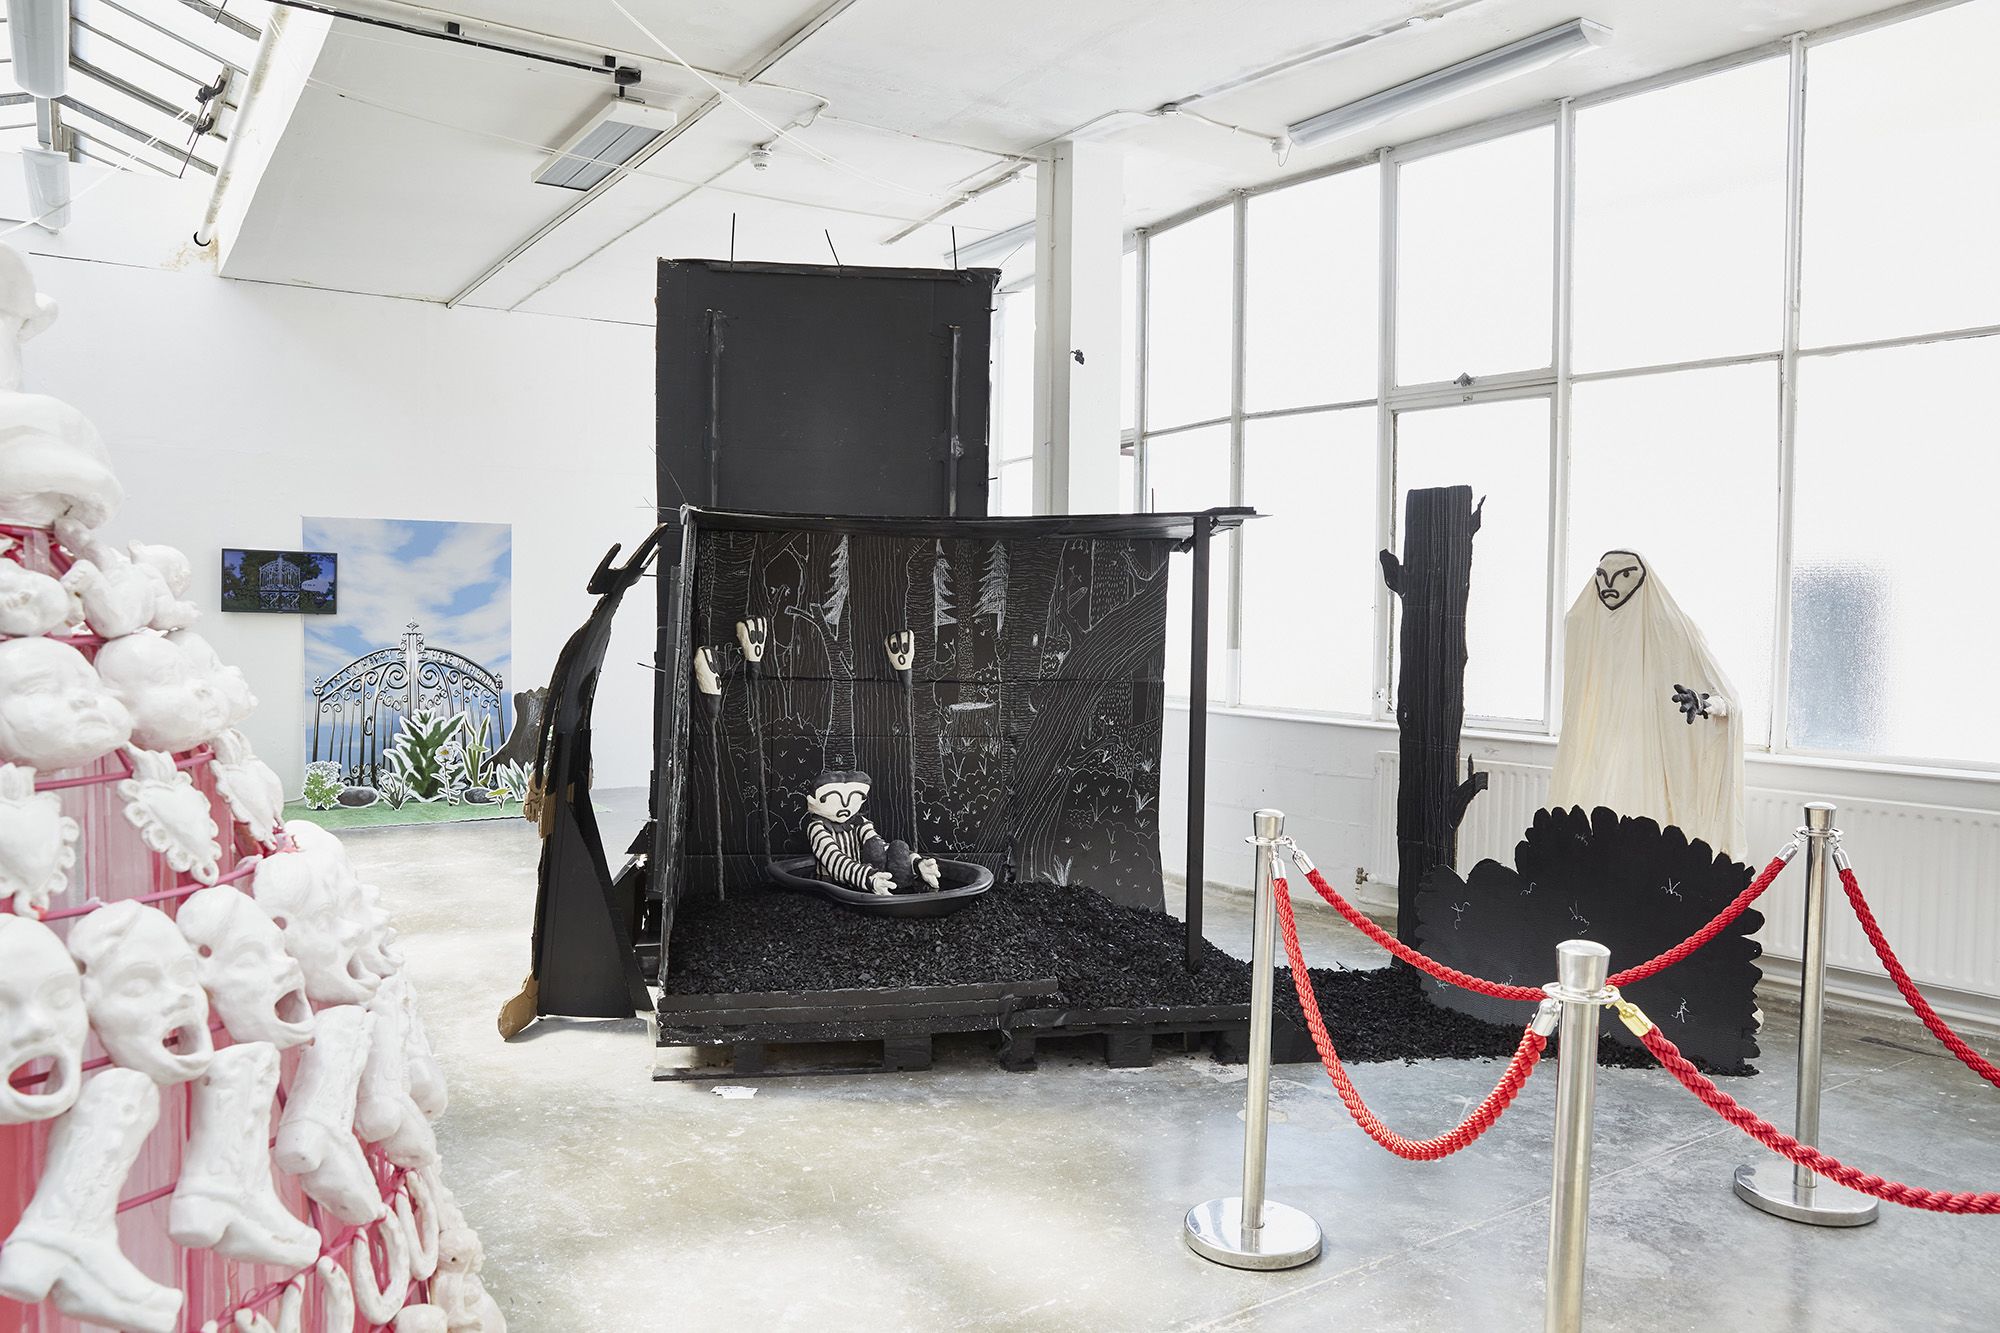 A series of sculptures, including a black and white cardboard structure of a set, with a sculpture of young boy. Work is based on comic book drawings.  